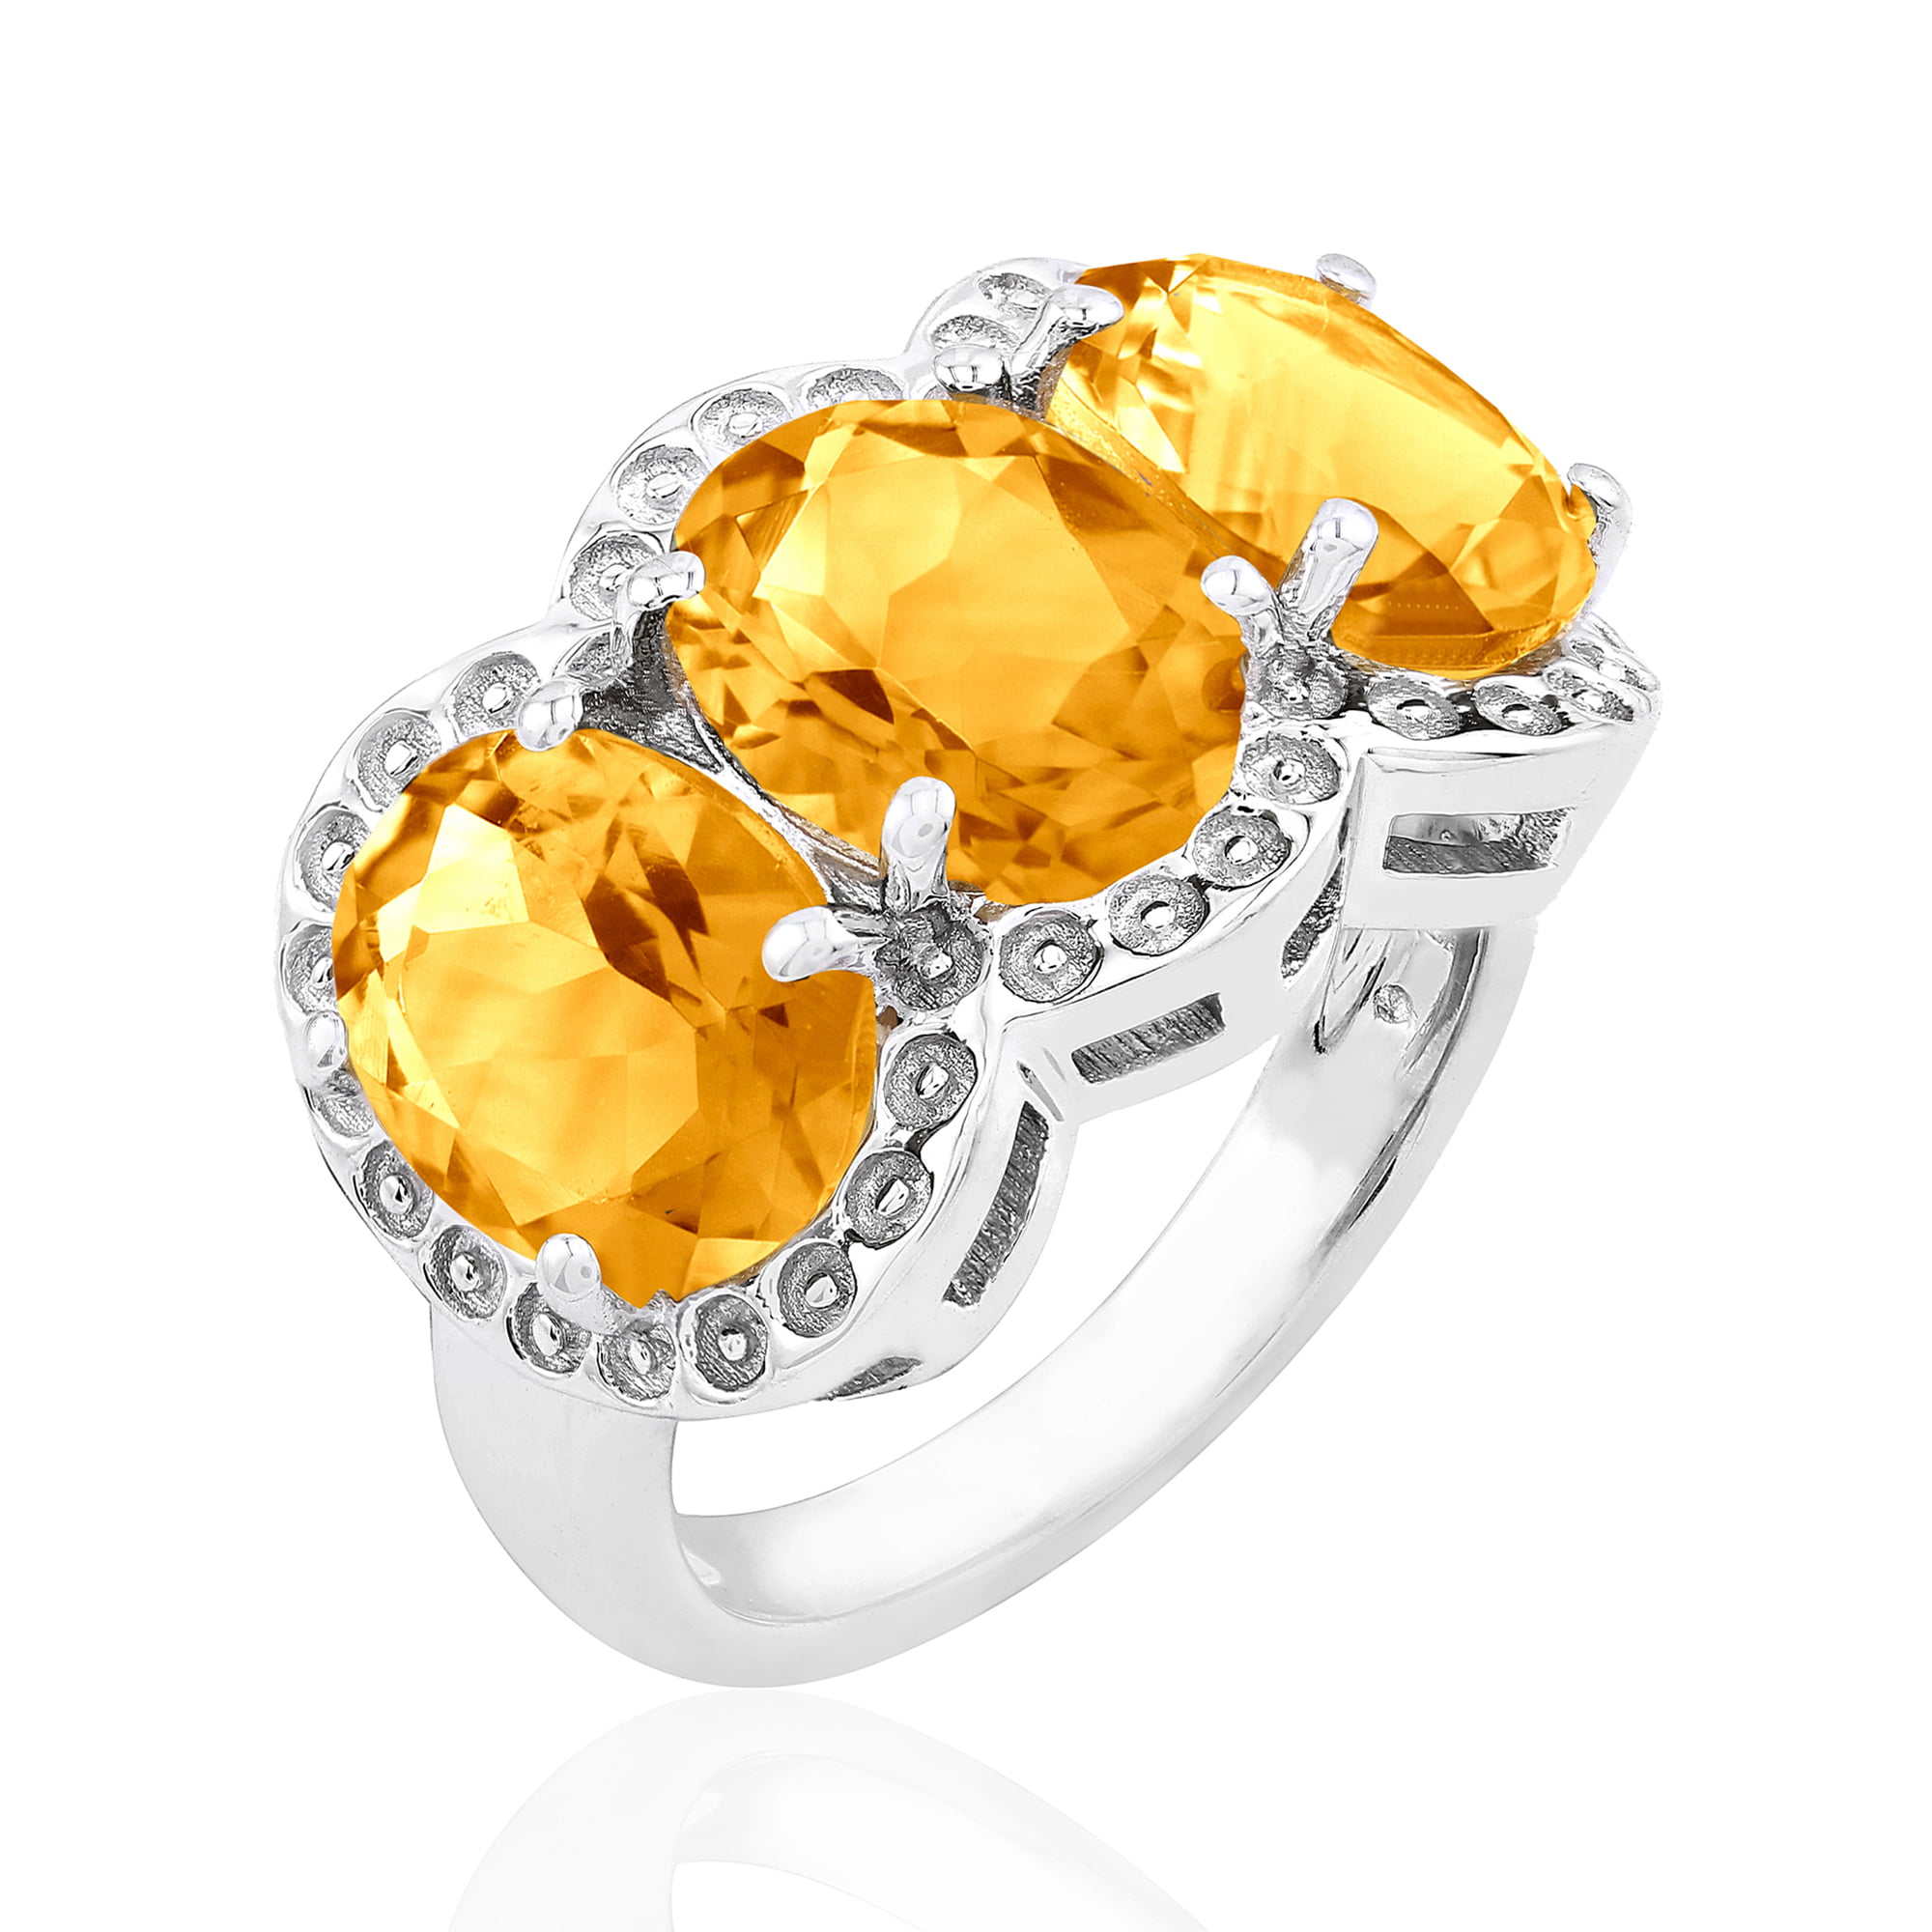 Available 5,6,7,8,9 Gem Stone King Yellow Citrine 925 Sterling Silver Women's Wing Ring 0.26 Ct Round Gemstone Birthstone